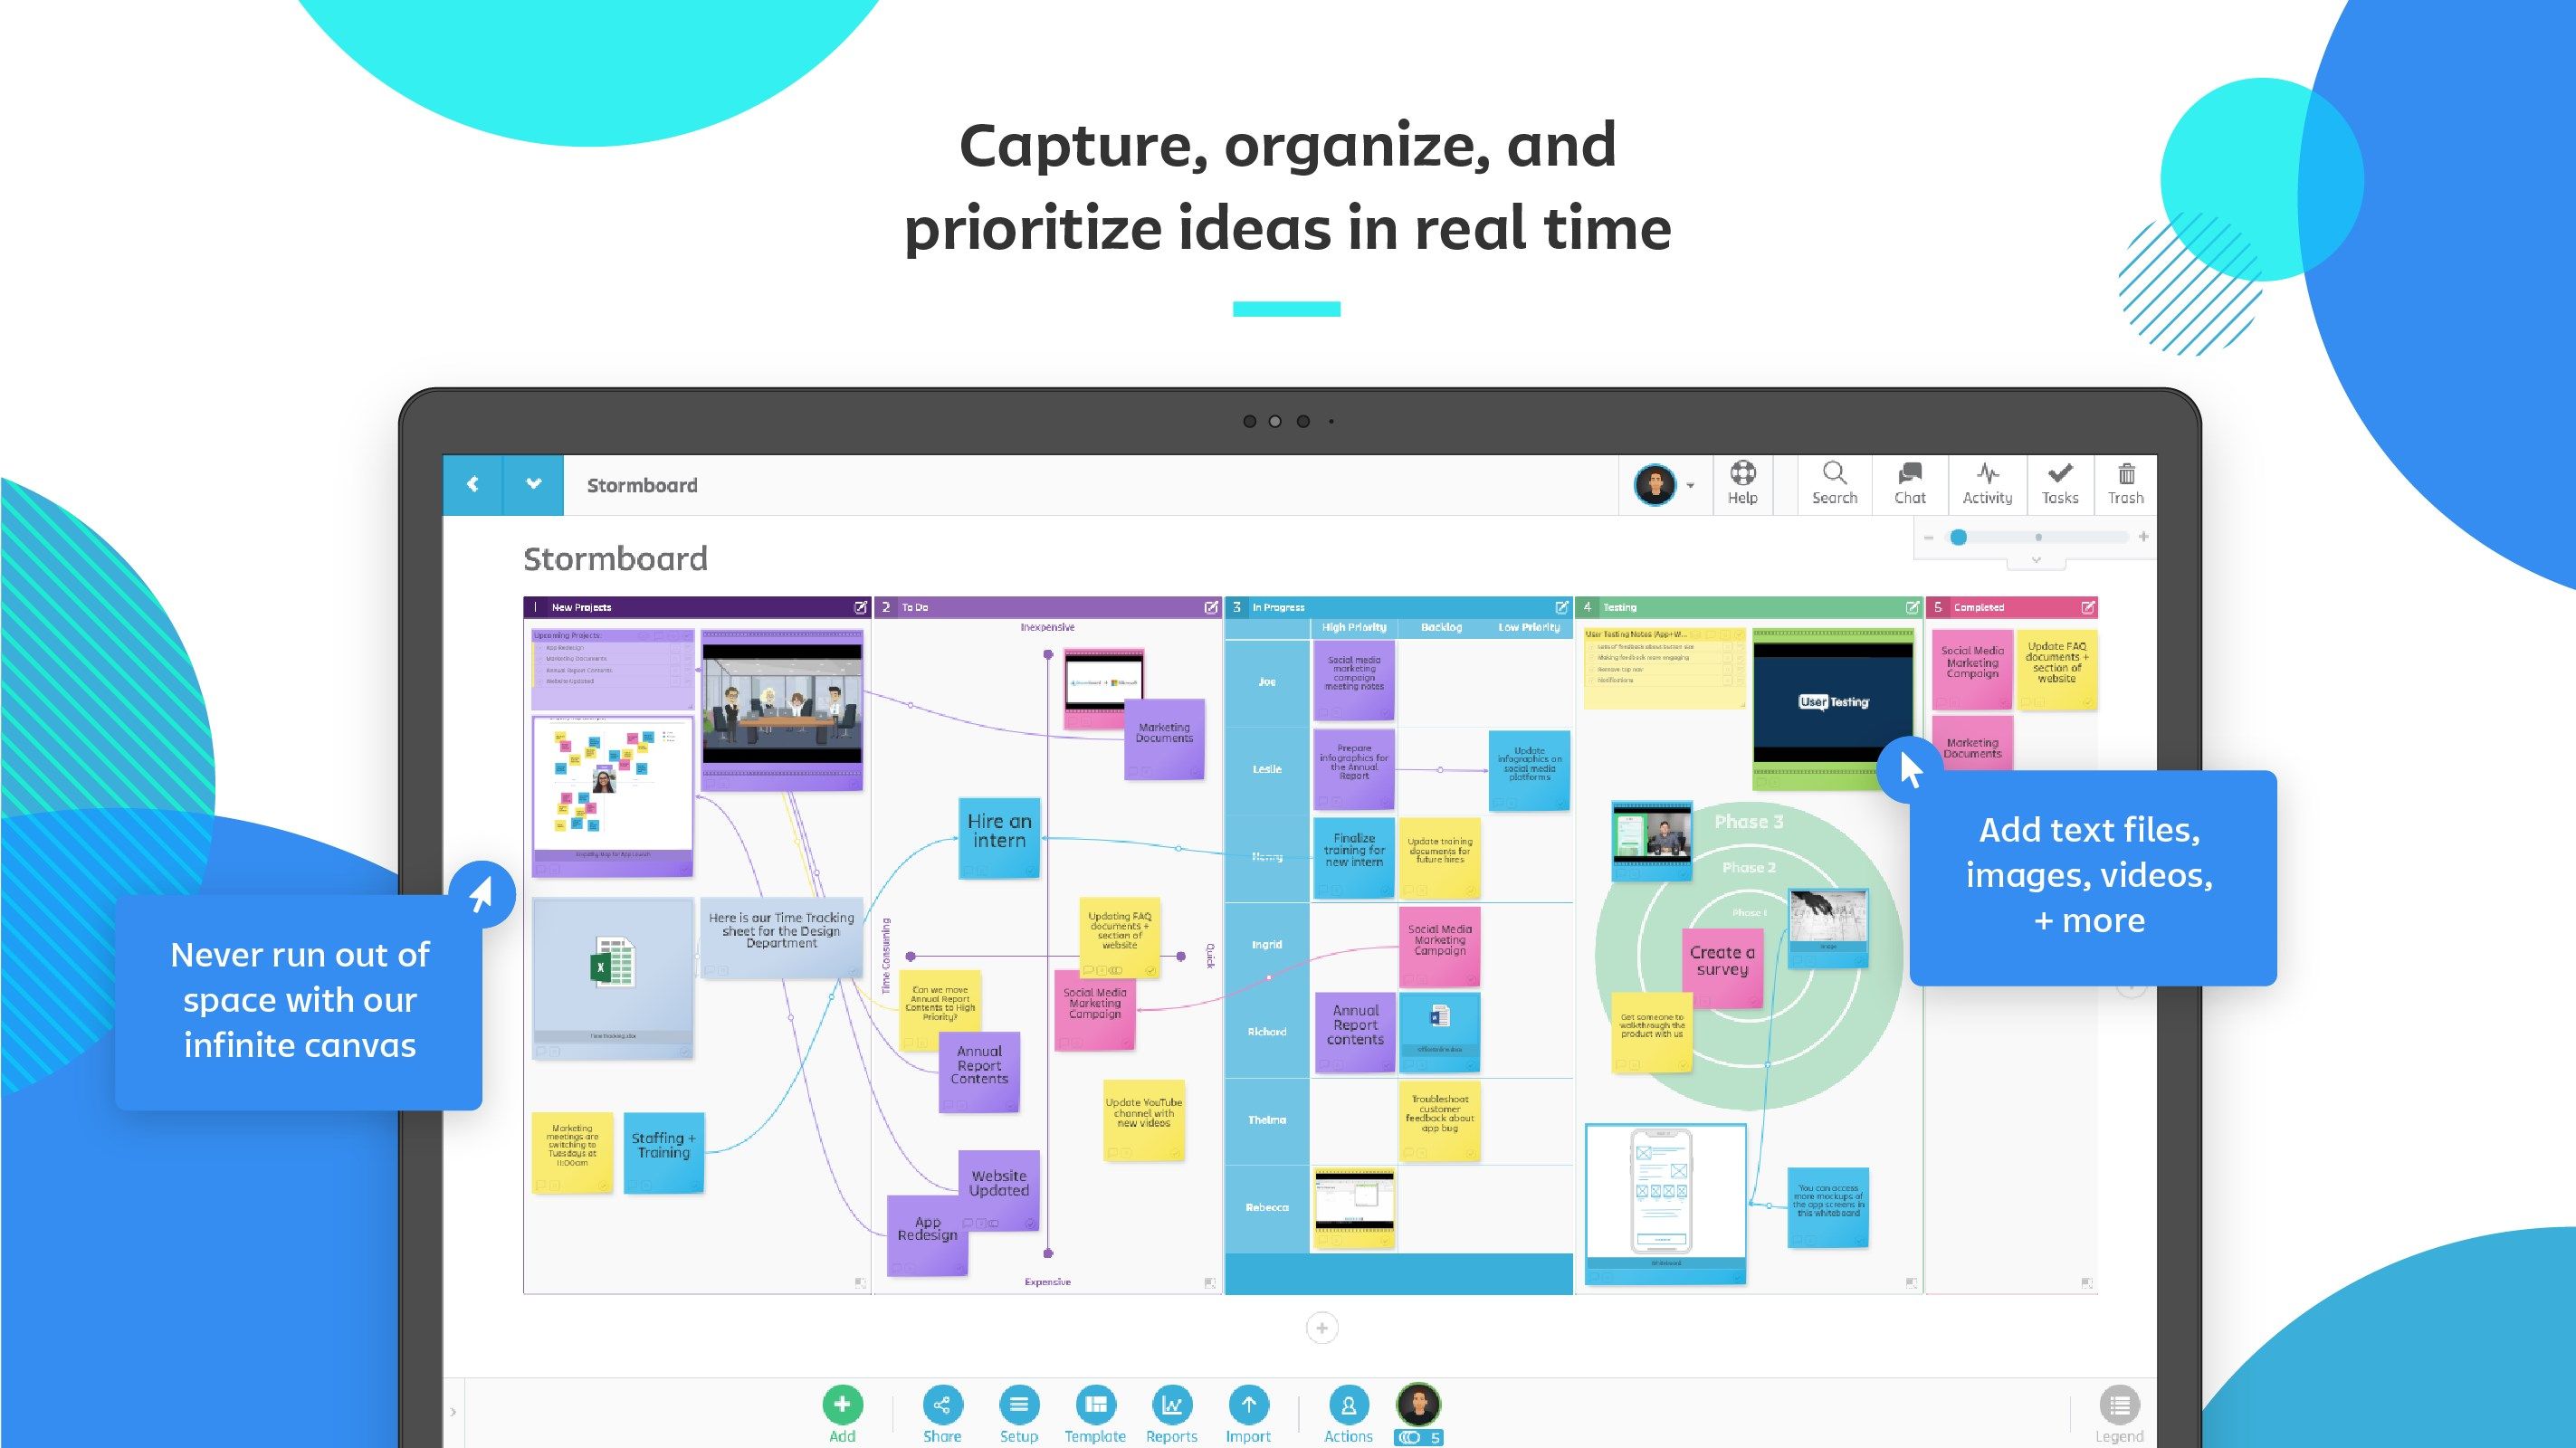 Capture, organize, and prioritize ideas in real time